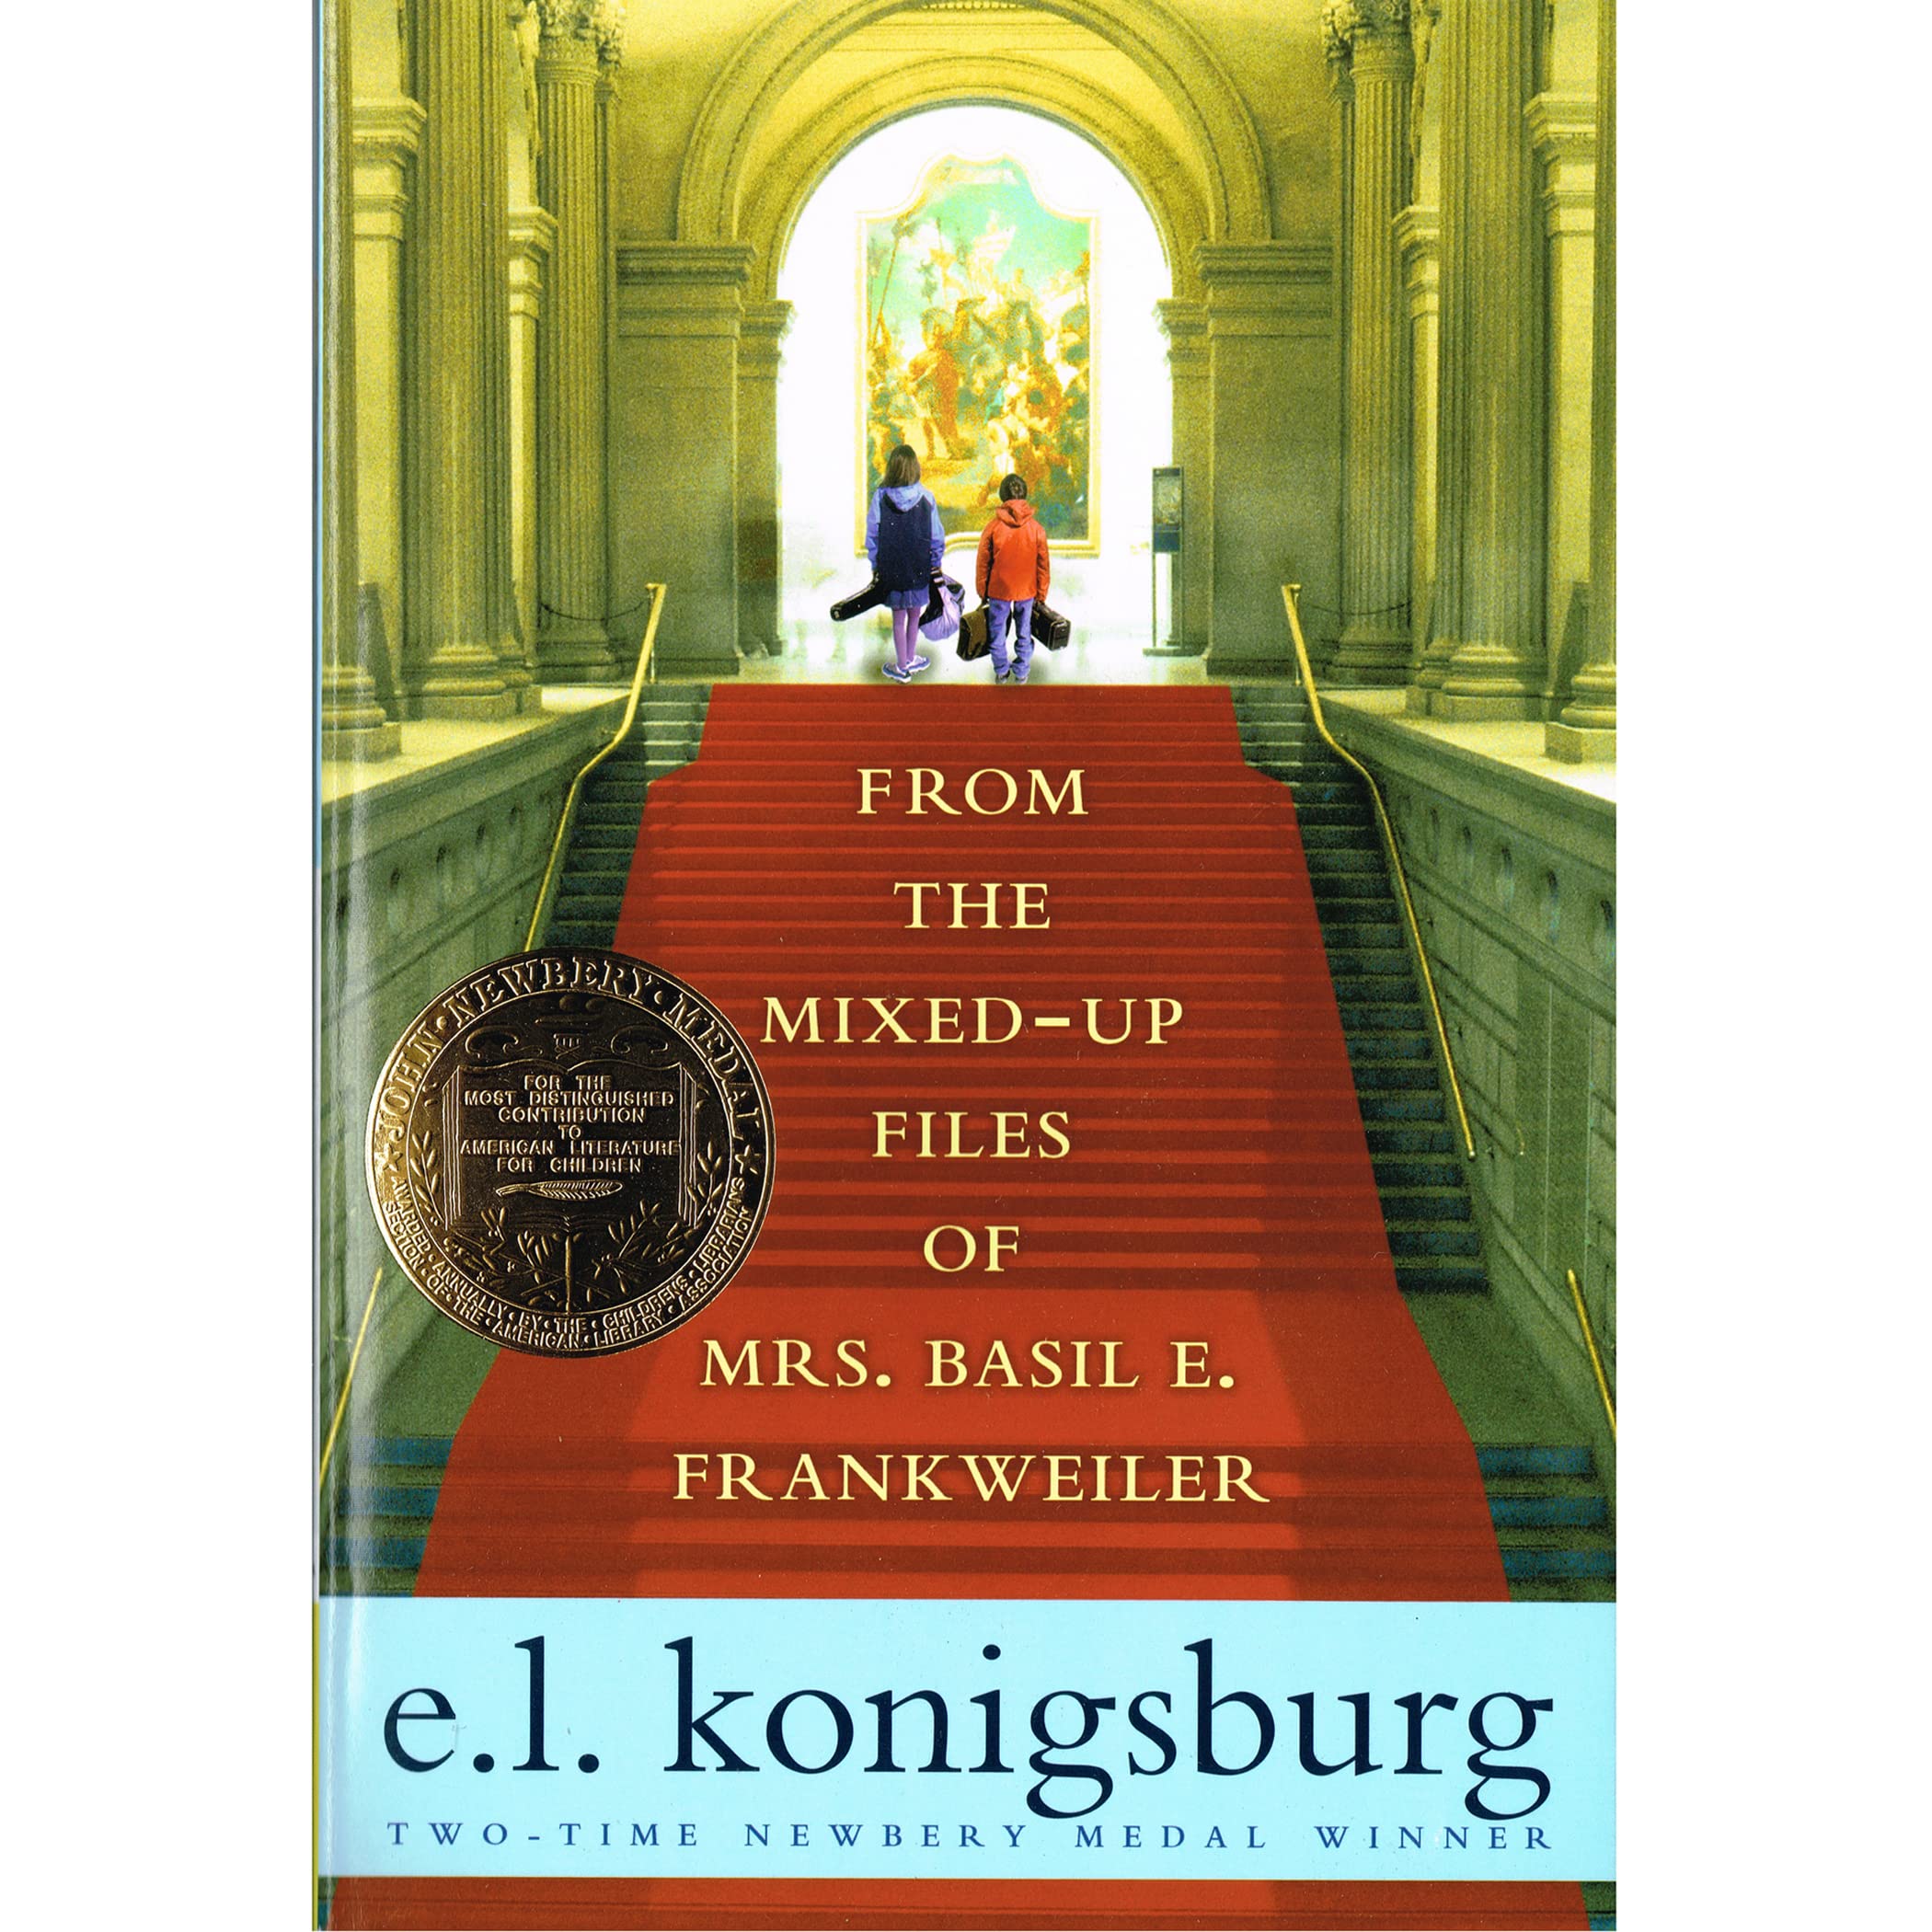 Newbery: From the Mixed-up files of Mrs. Basil E. Frankweiler